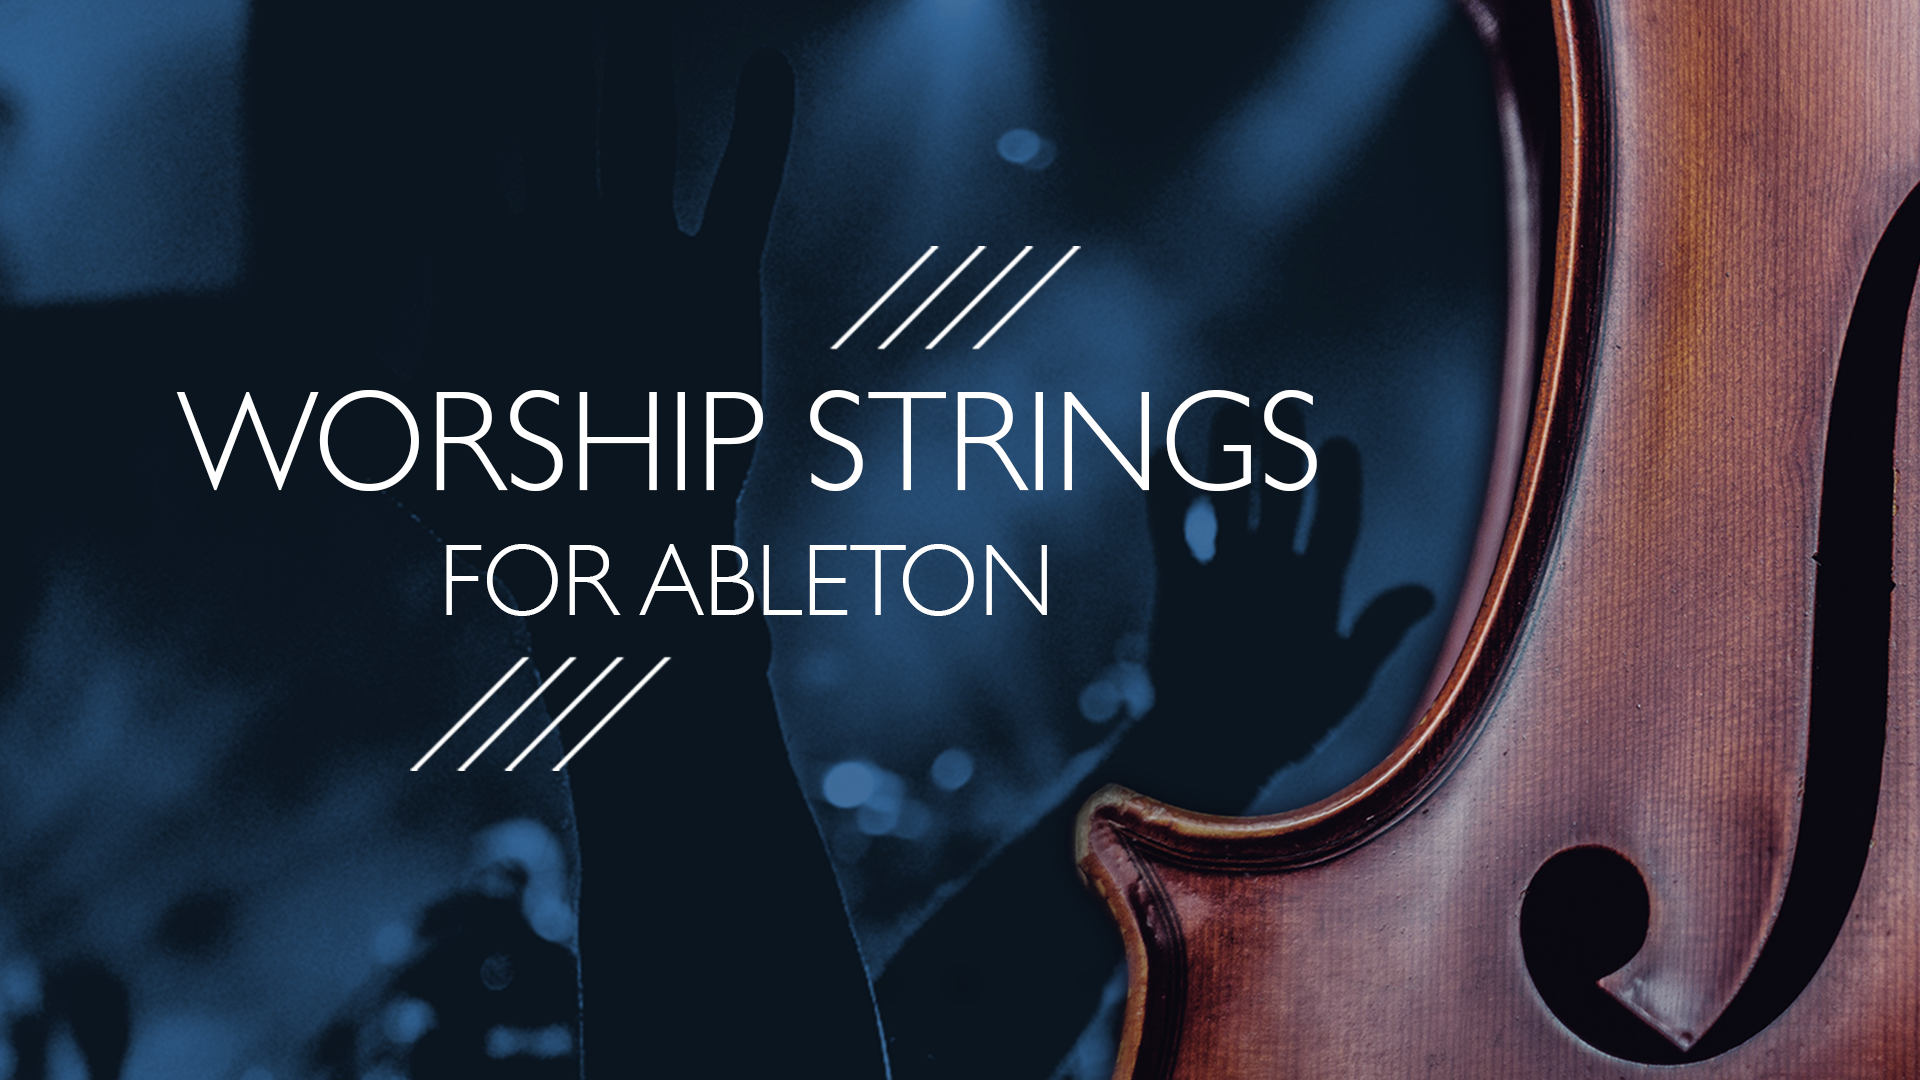 Worship Strings for Ableton is Now Available!